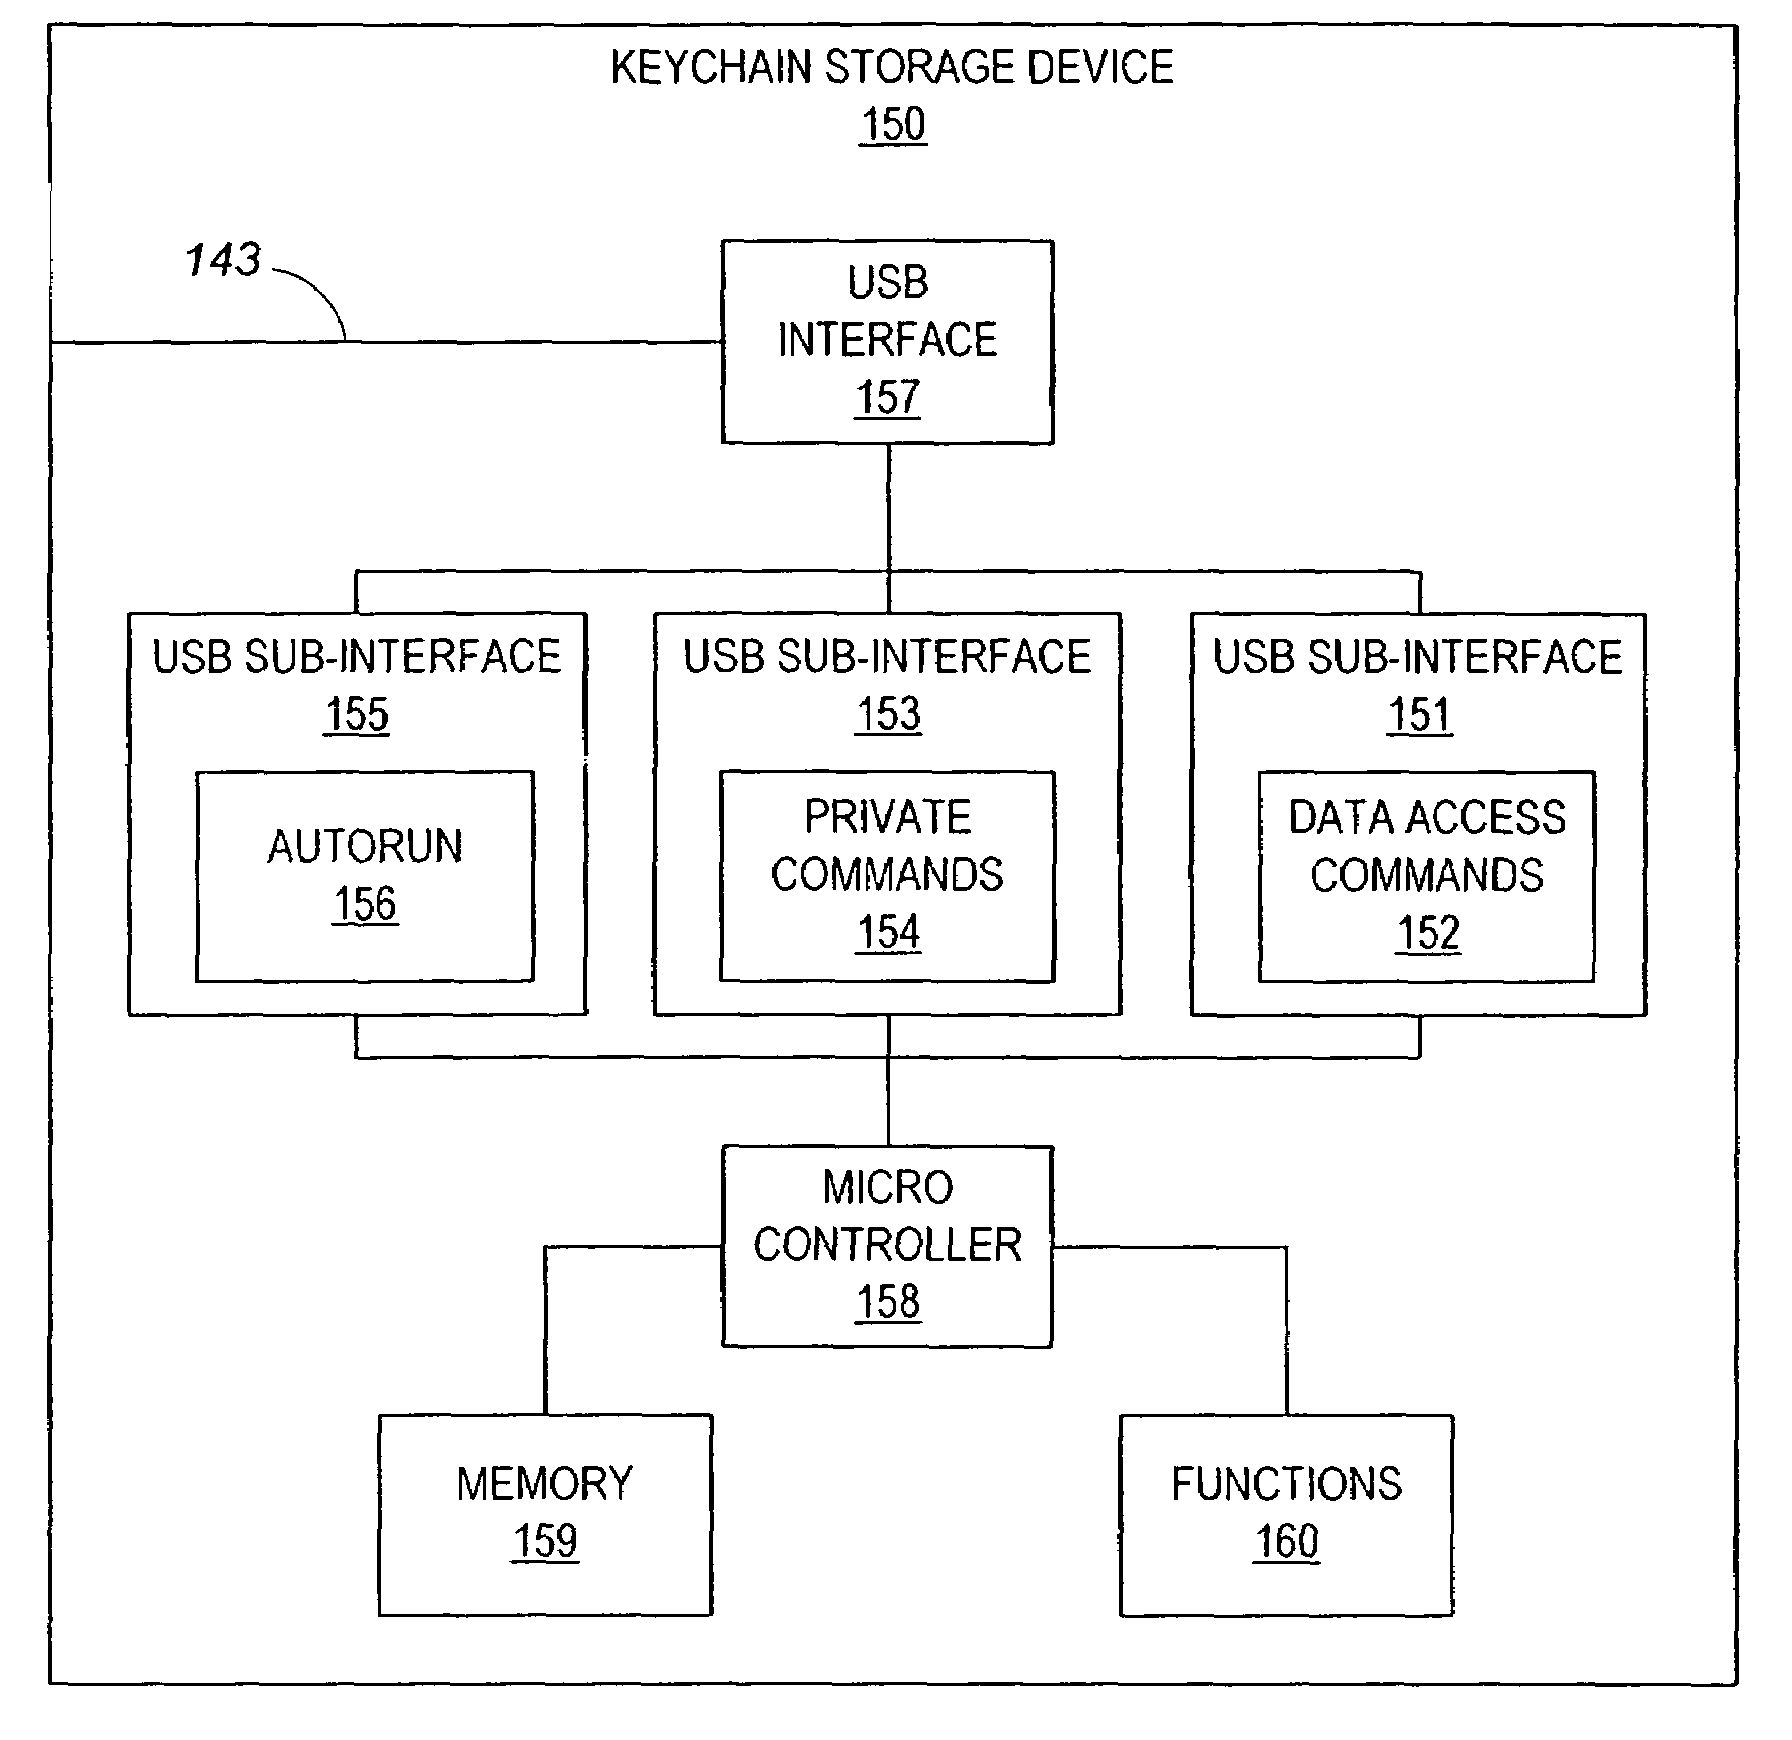 Data storage device with full access by all users